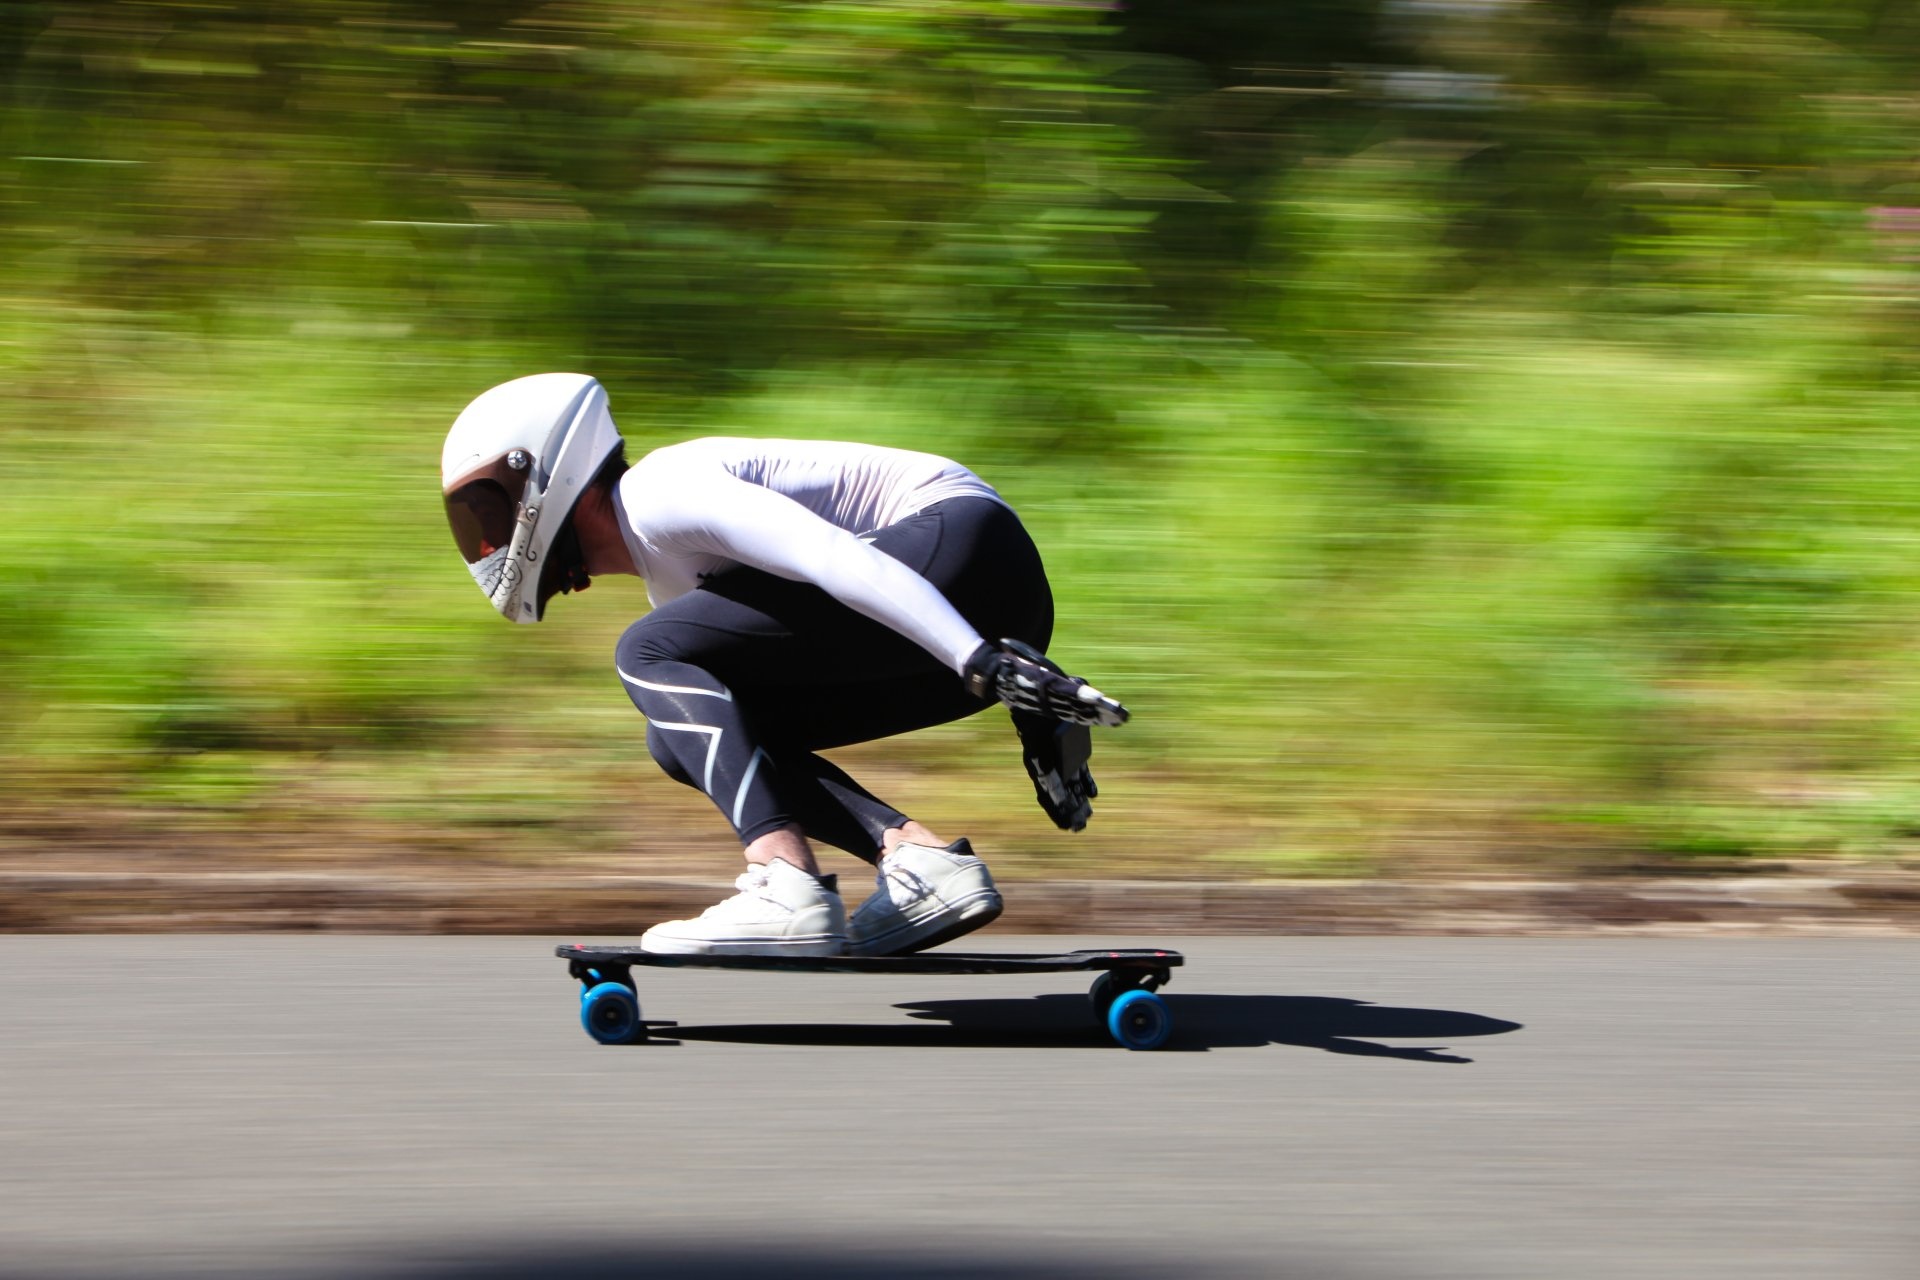 Longboarding: Freeriding, Sliding tricks, Early grabs, Recreational and extreme skateboard sport. 1920x1280 HD Background.